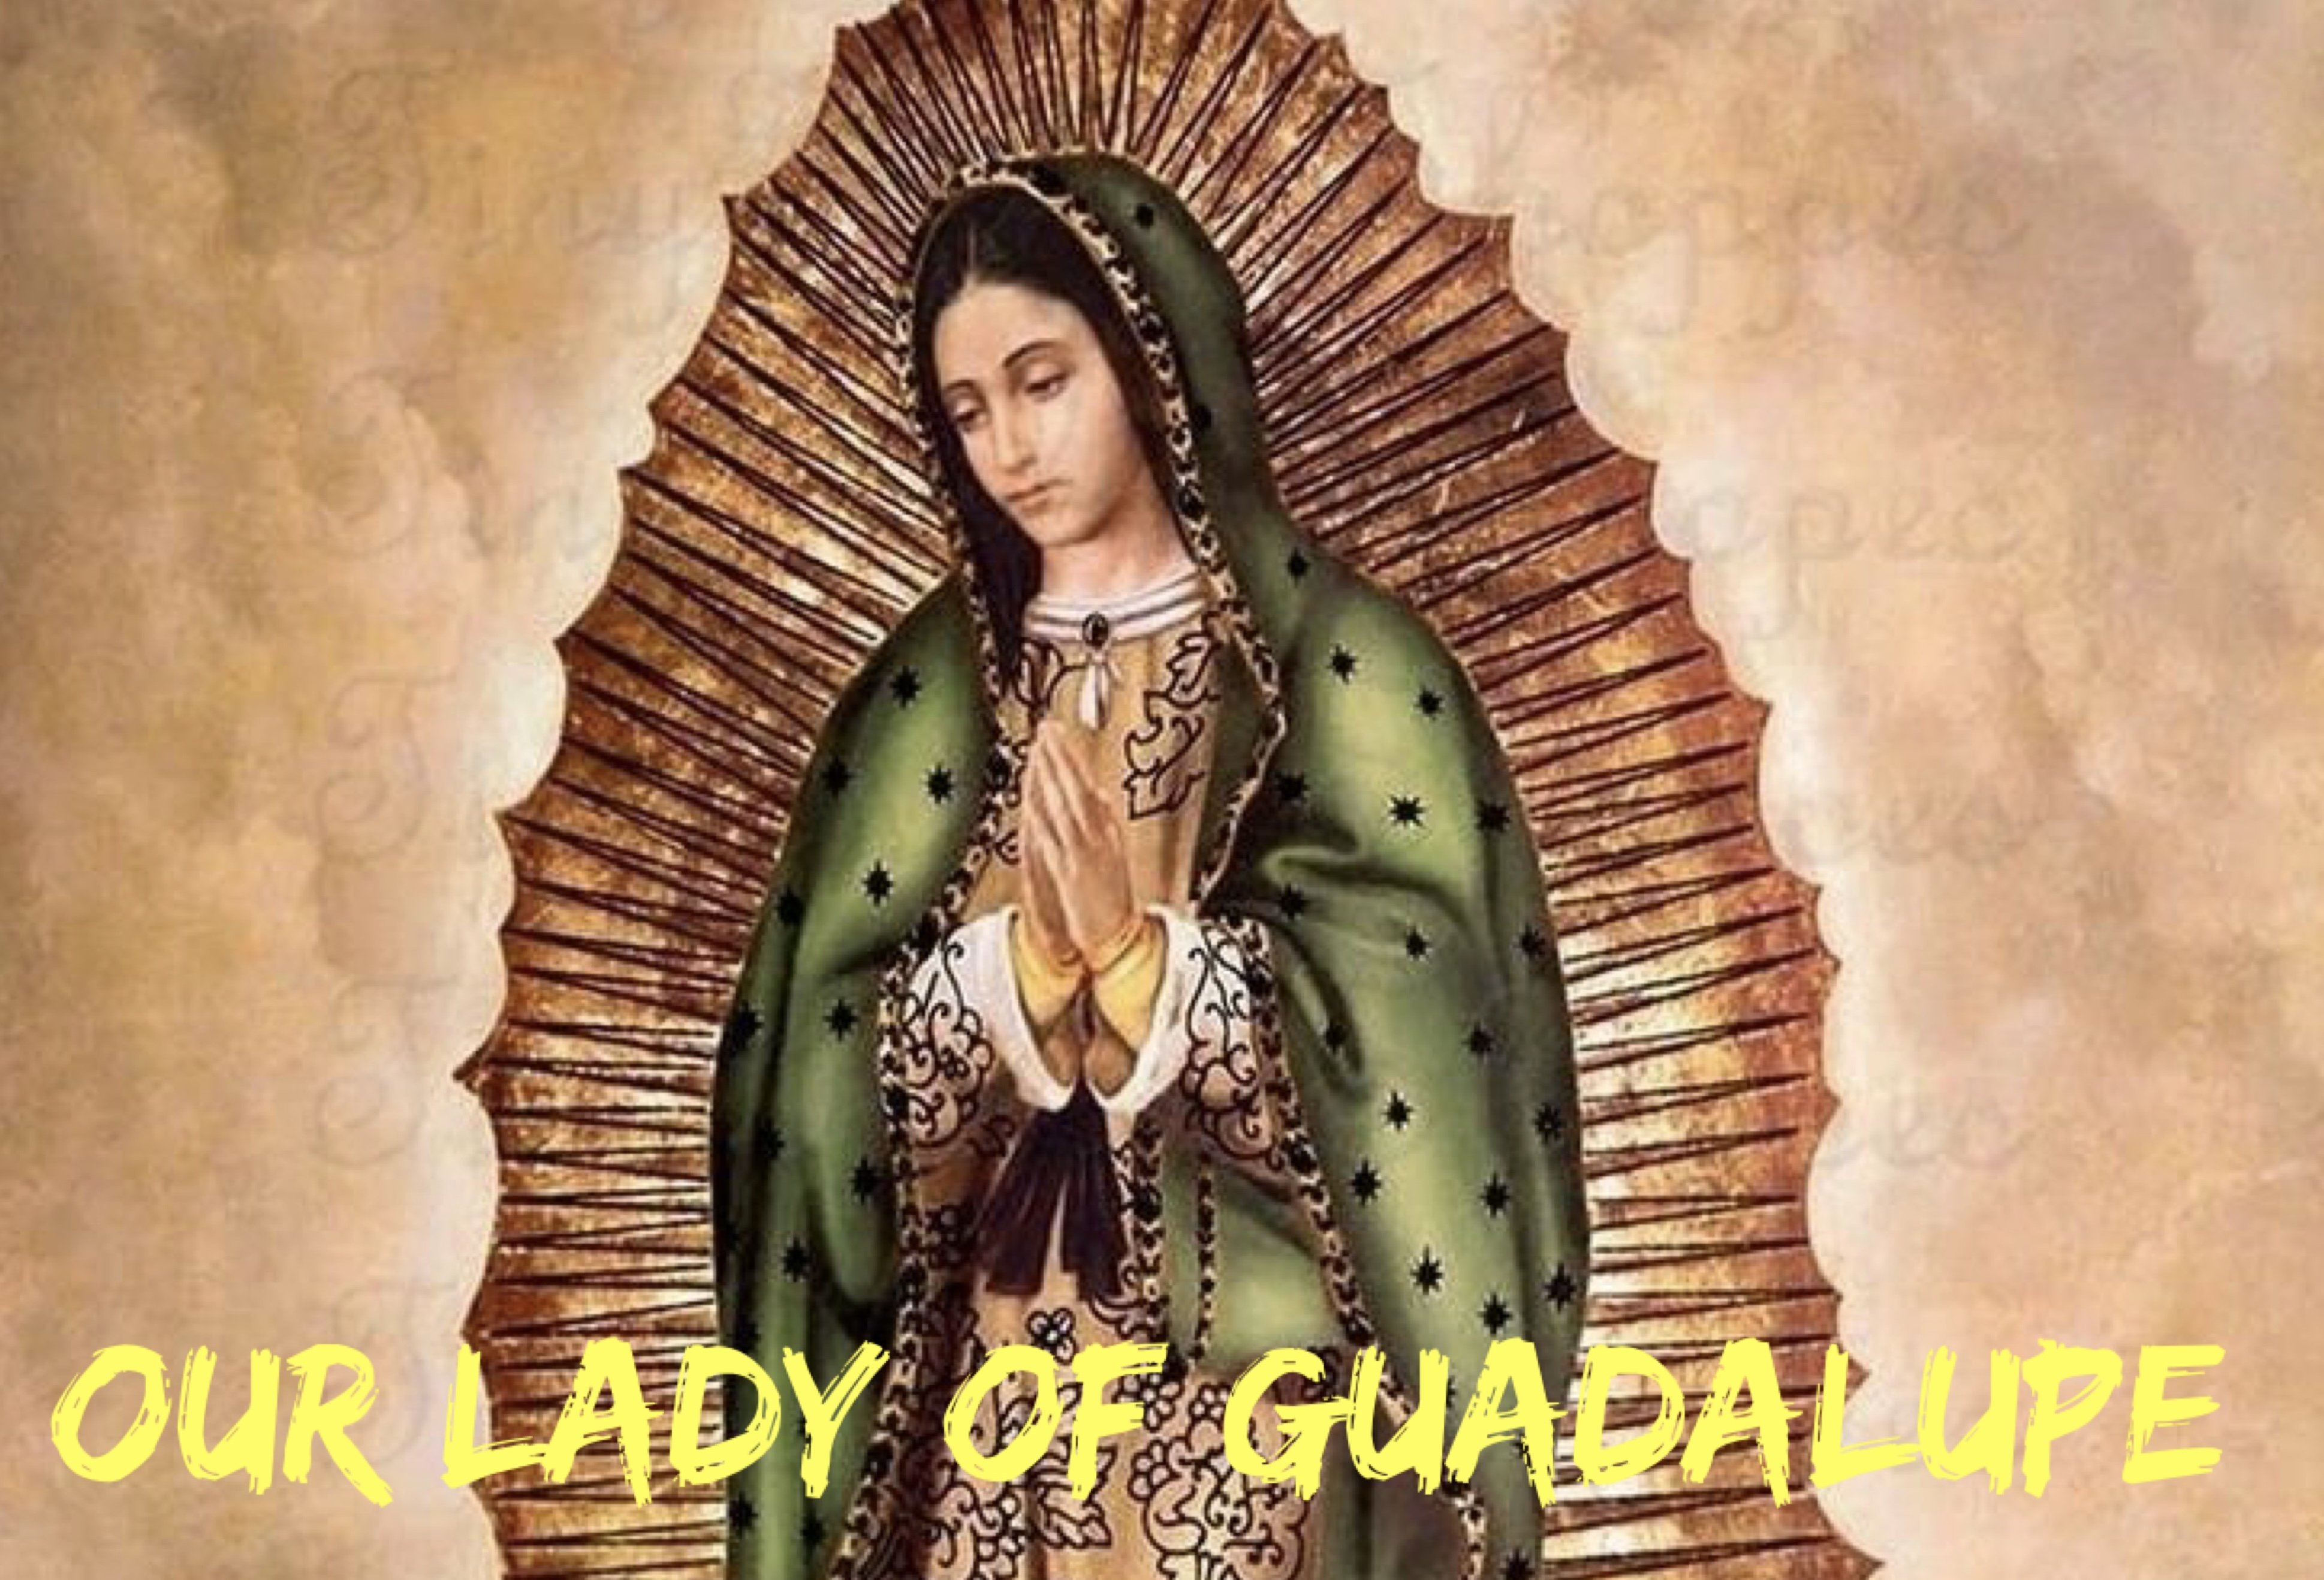 12th December - Our Lady of Guadalupe